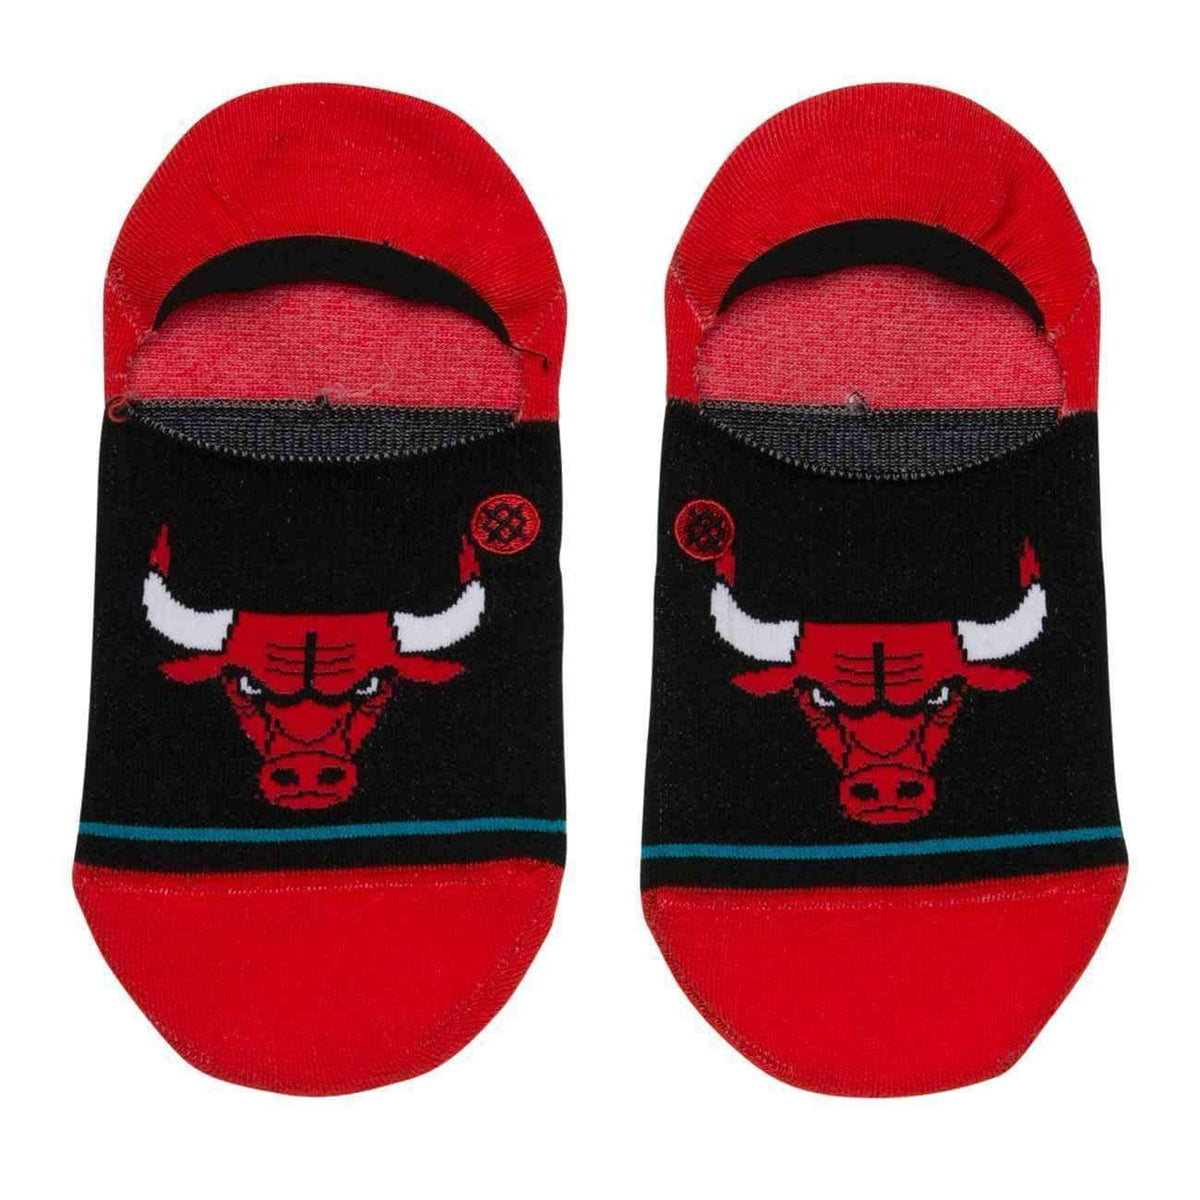 Stance NBA Arena Bulls Invisible Low Socks in Red Mens Low/Ankle Socks by Stance